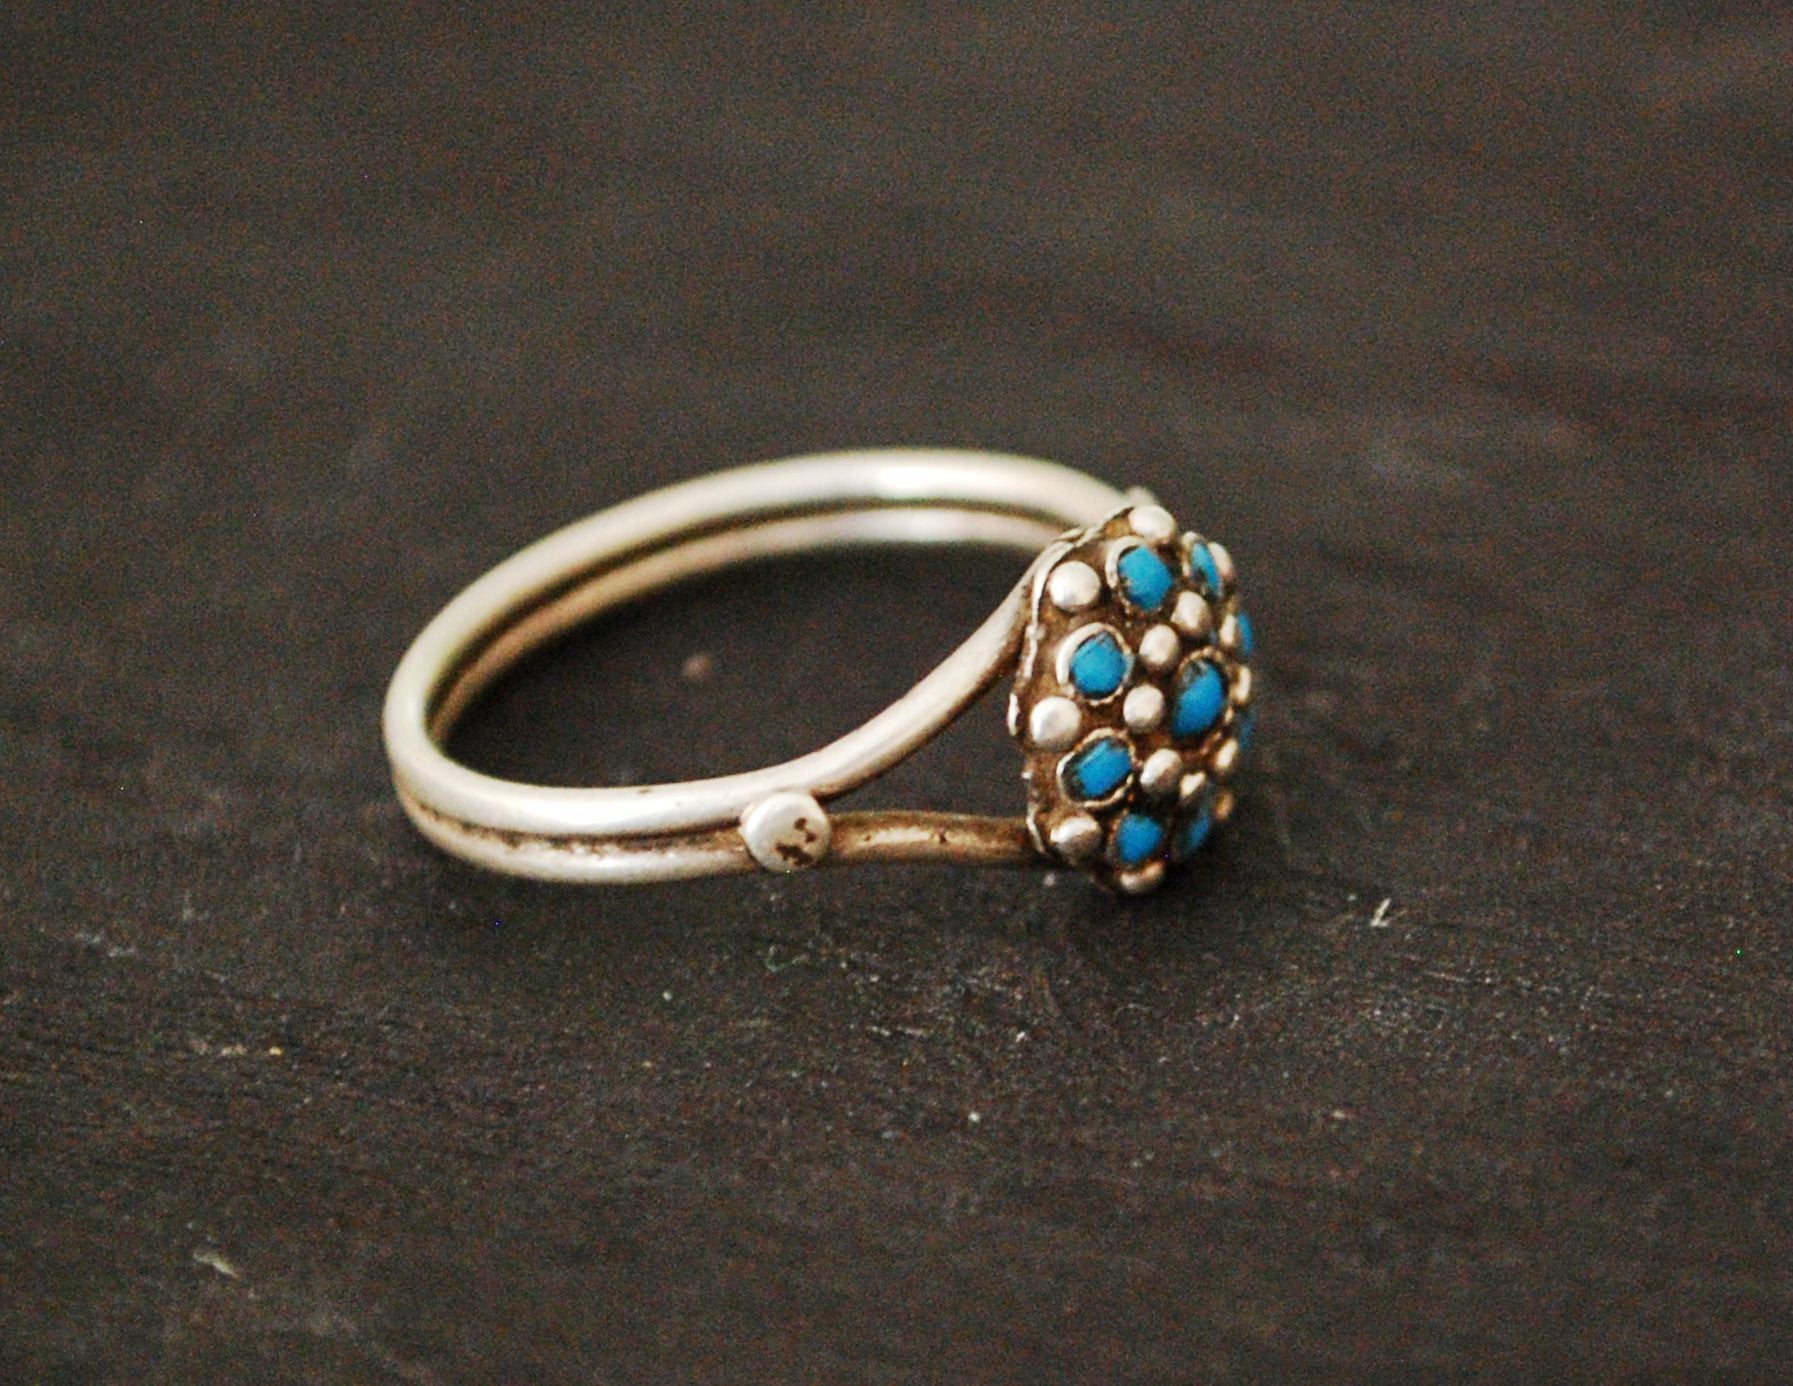 Ethnic Turquoise Ring from India - Size 7 3/4 - Rajasthani Ring - Rajasthani Jewelry - India Silver Ring - Ethnic Jewelry